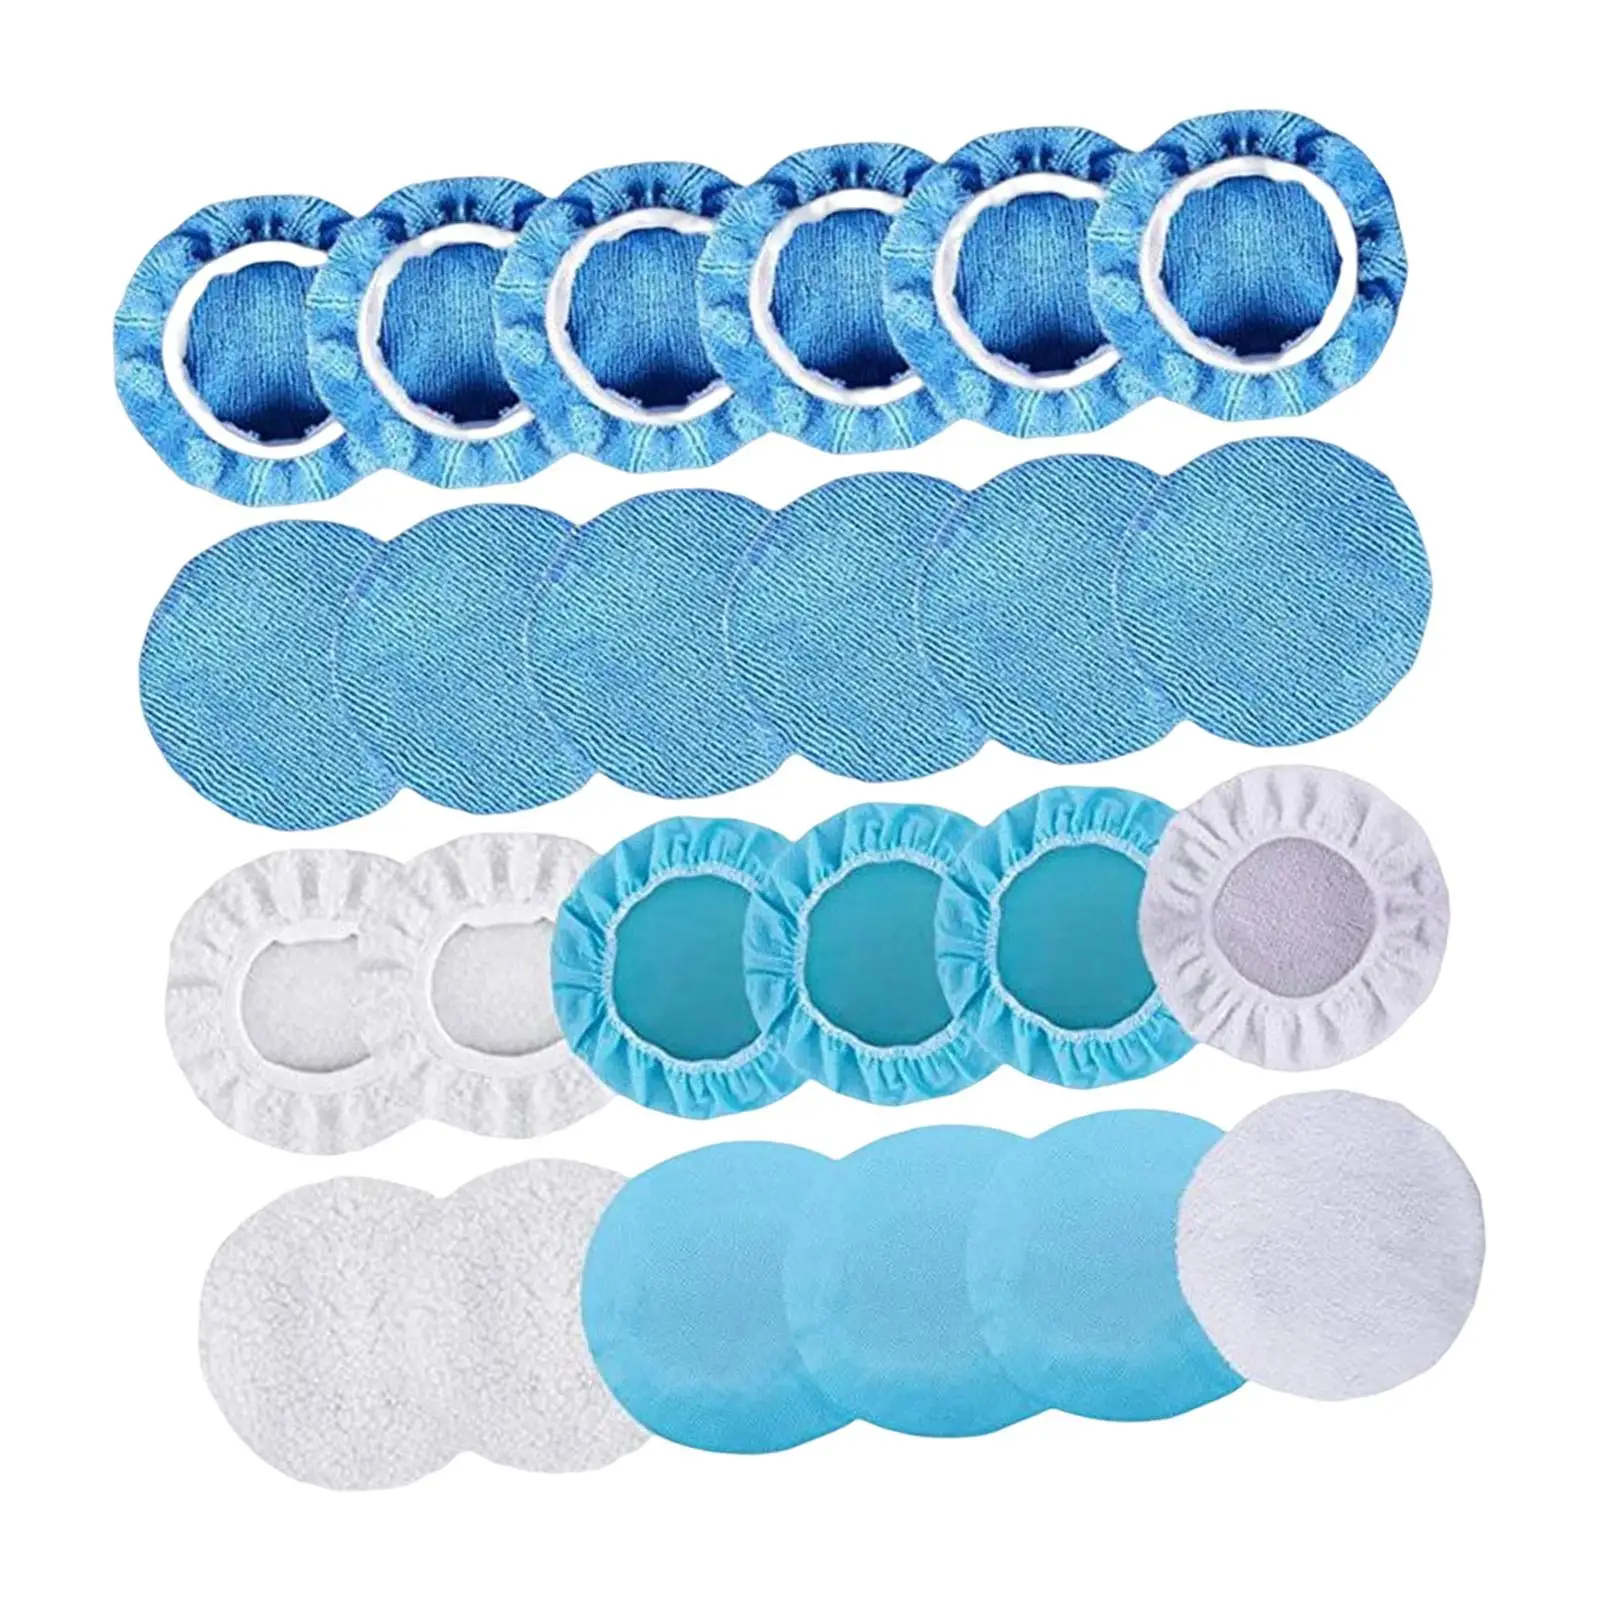 

24Pcs Multipurpose Polishing Pads Durable Car Hand Polish Cleaning Pads Microfiber Detailing Buffing Pads for Sealing Glazes